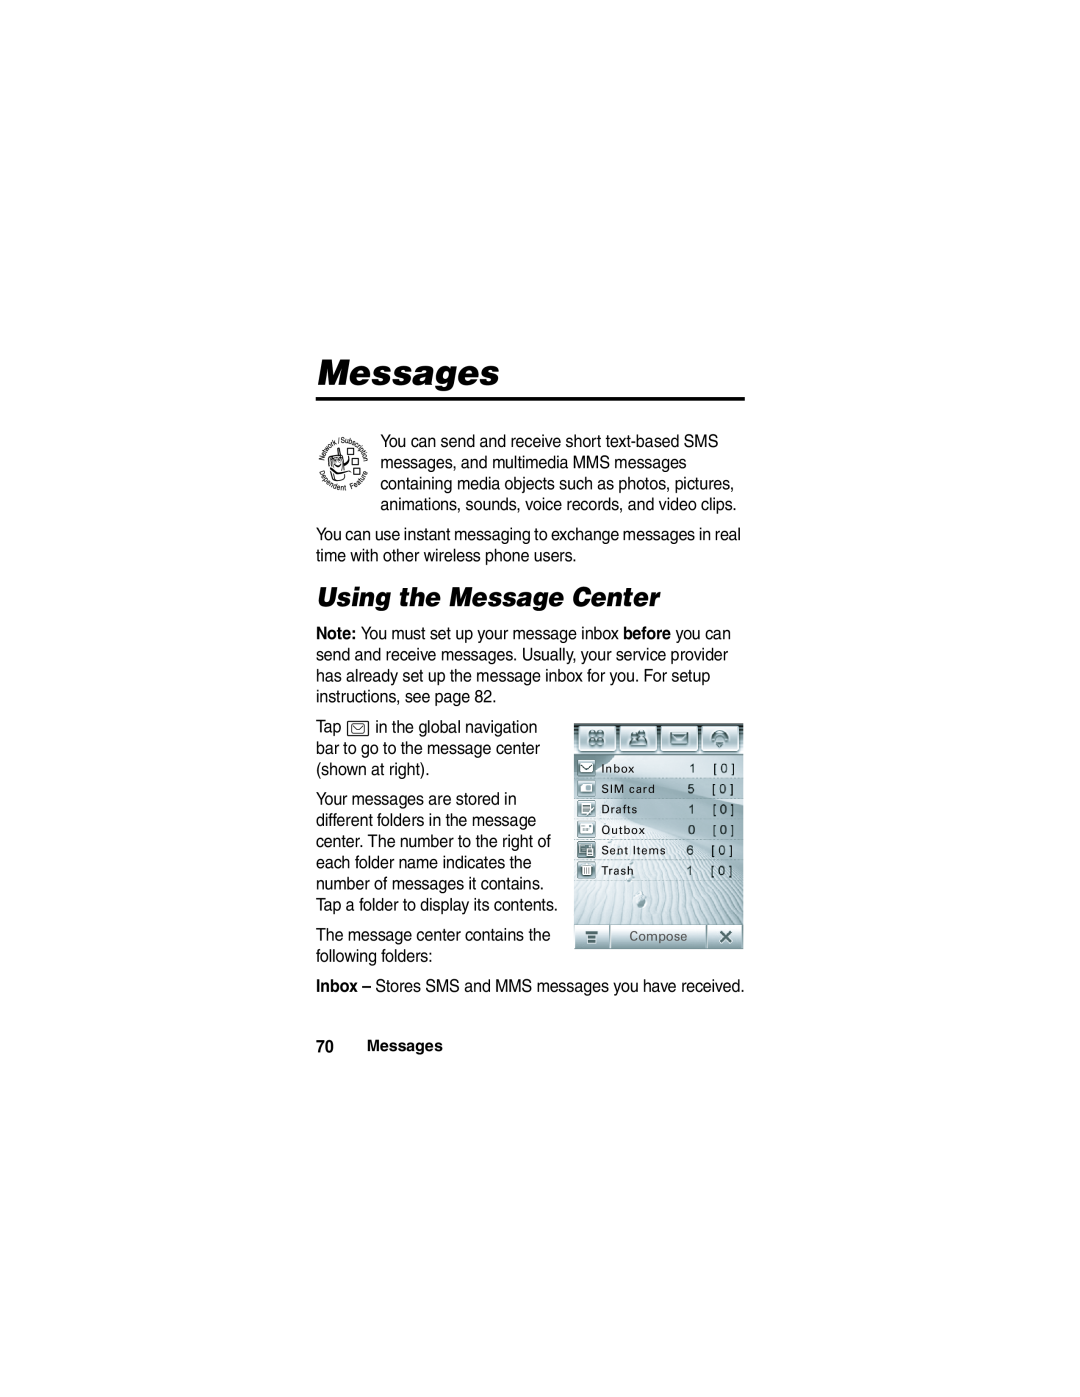 Motorola A780 manual Messages, Using the Message Center 